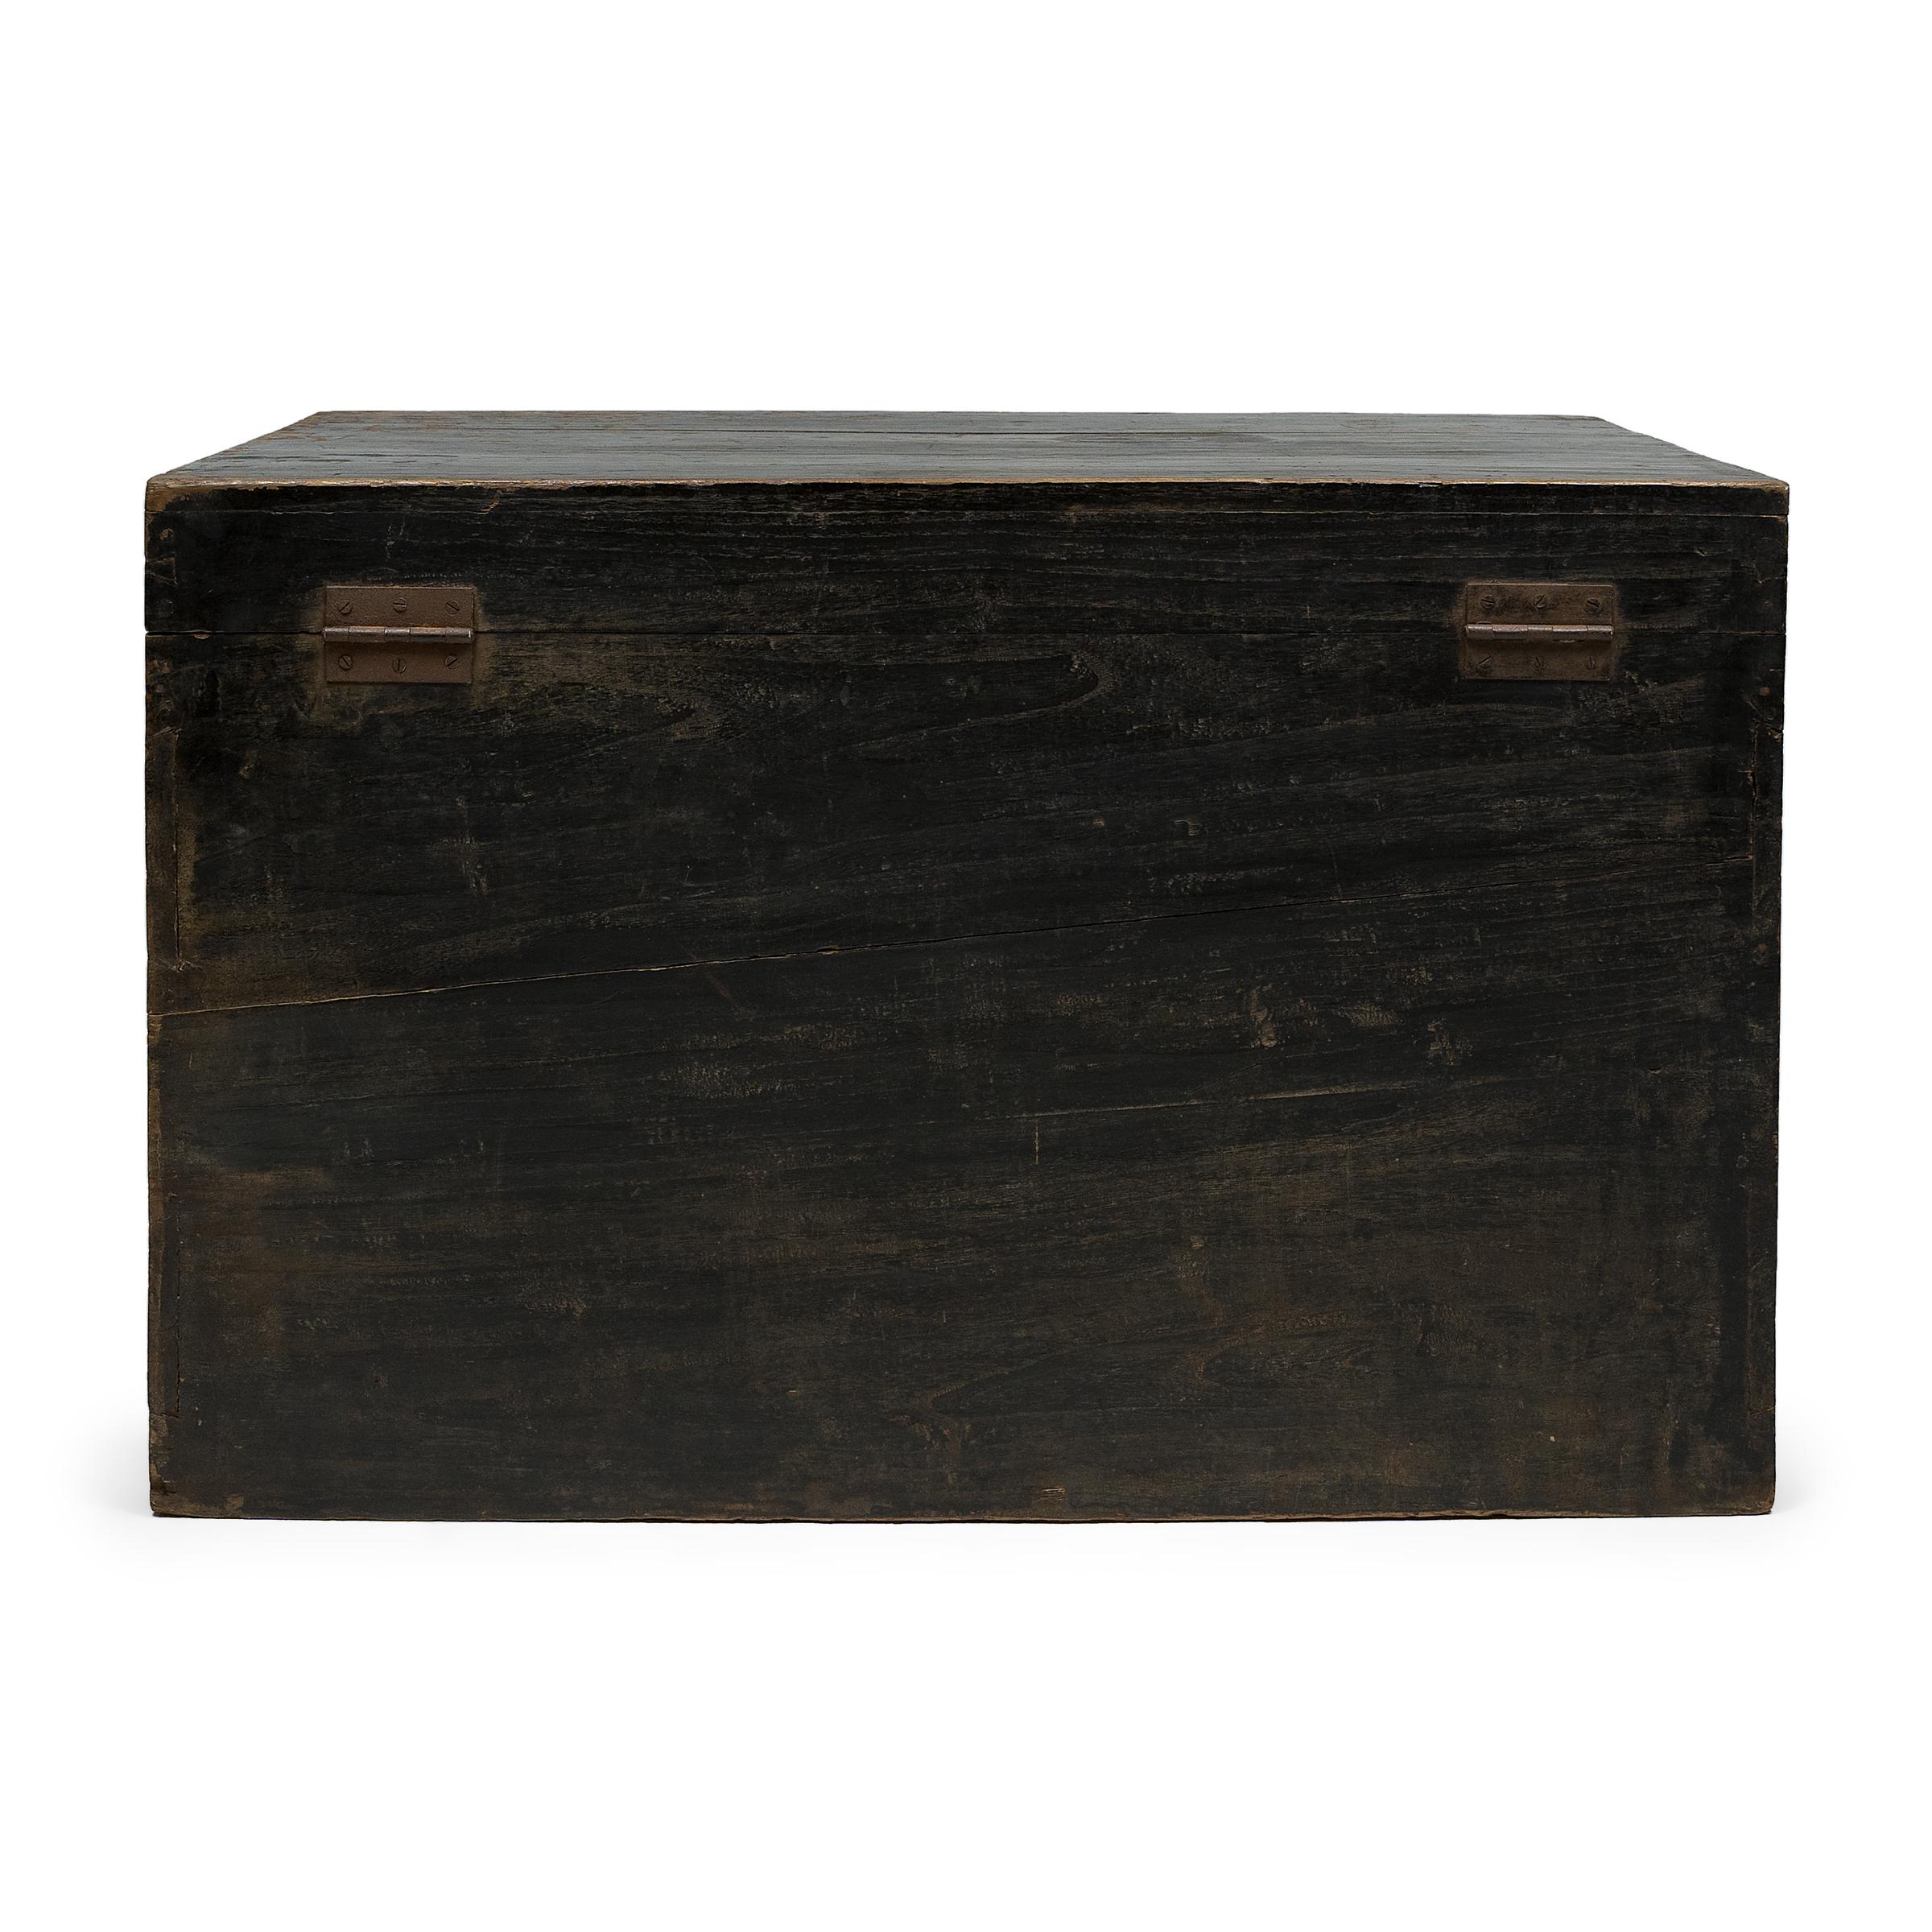 Wood Chinese Painted Festival Trunk, c. 1820 For Sale